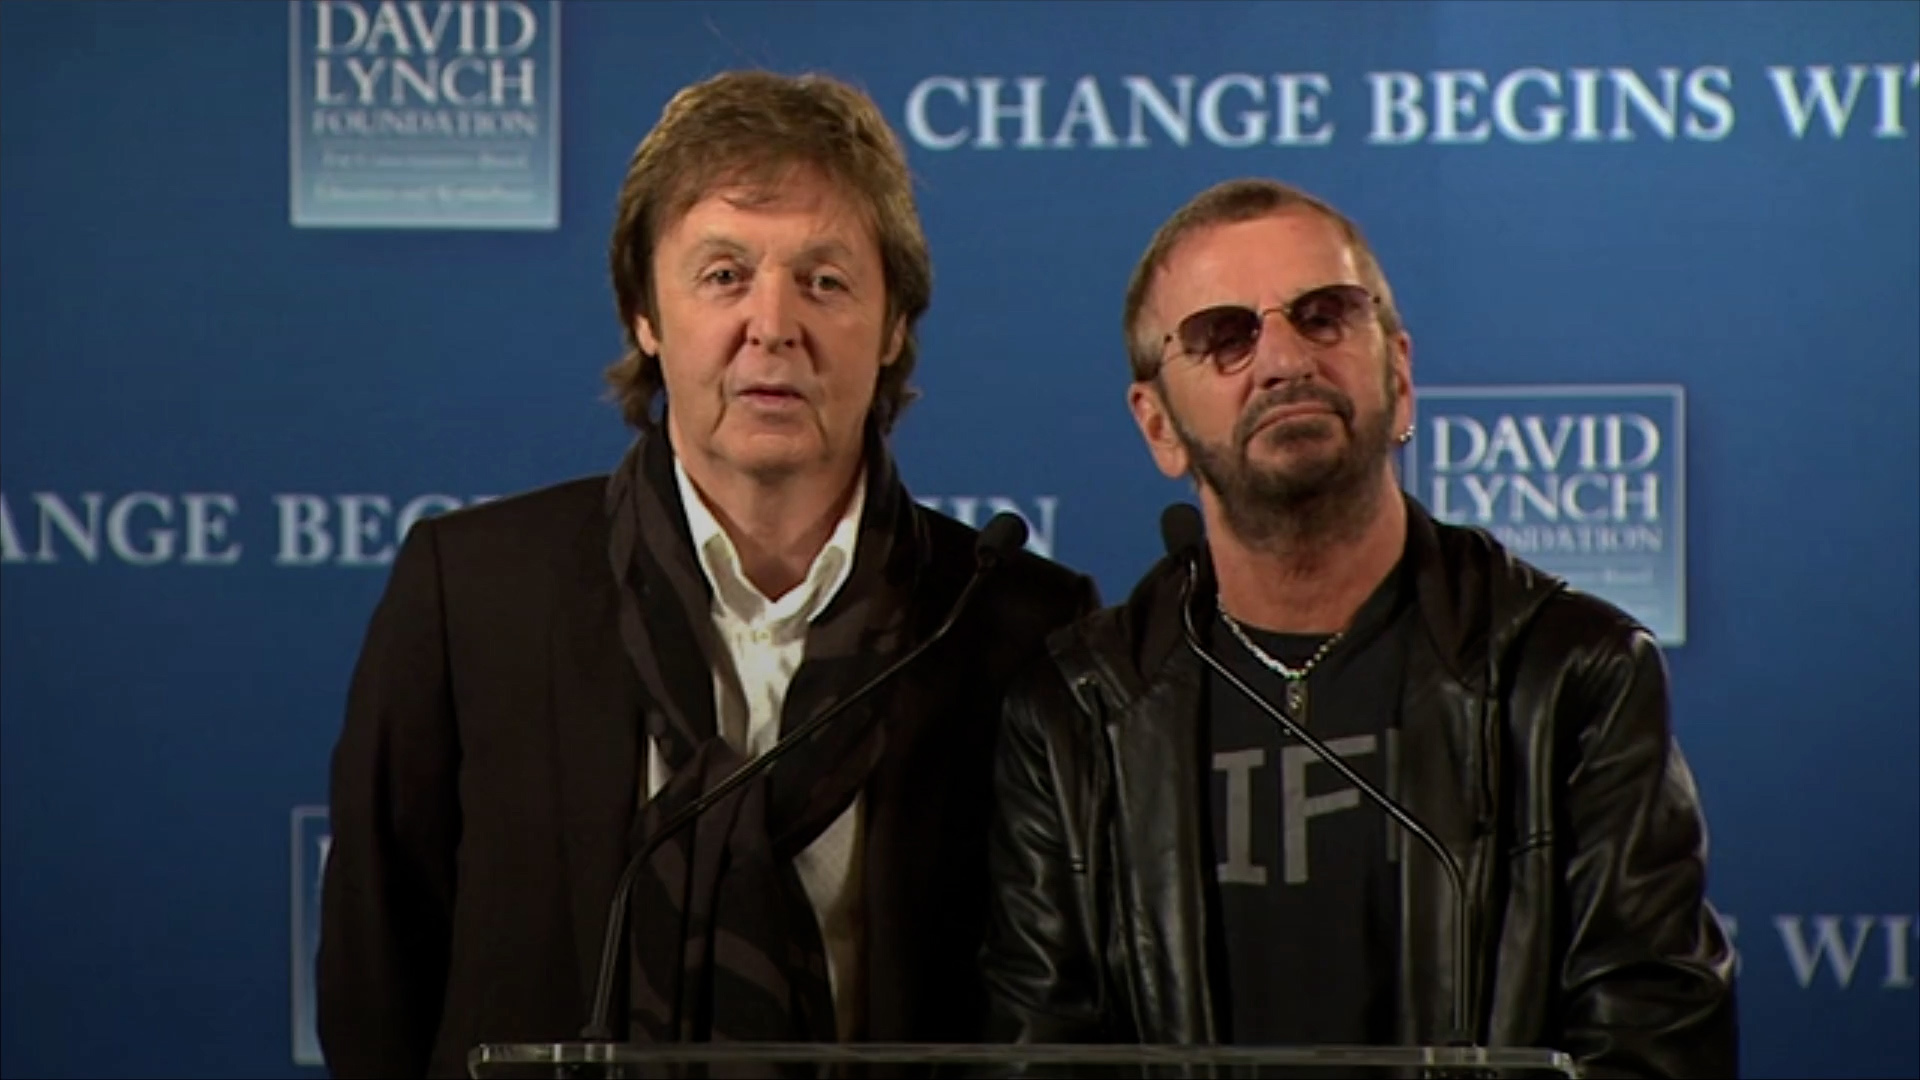 Paul McCartney and Ringo Starr: We never thought the Beatles would last